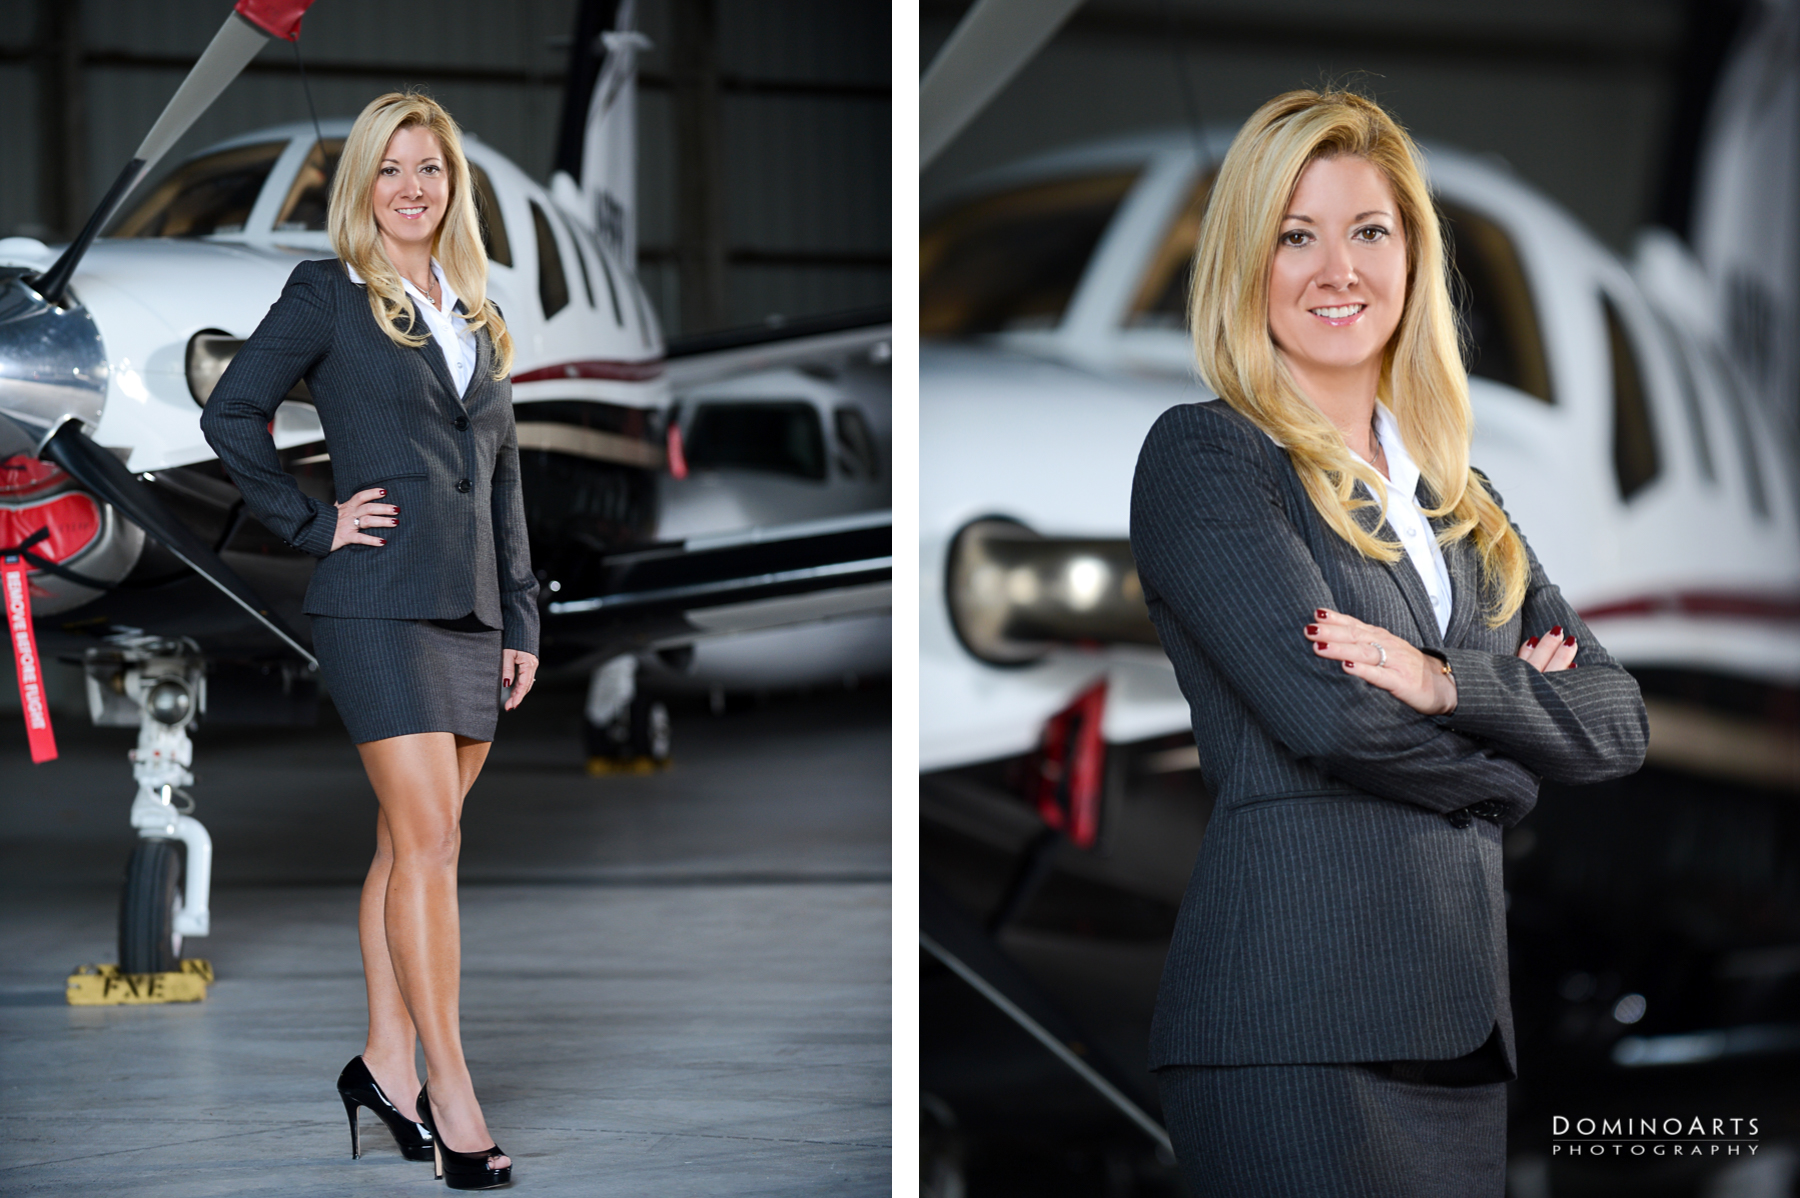 Professional Law Firm Photography / South Florida